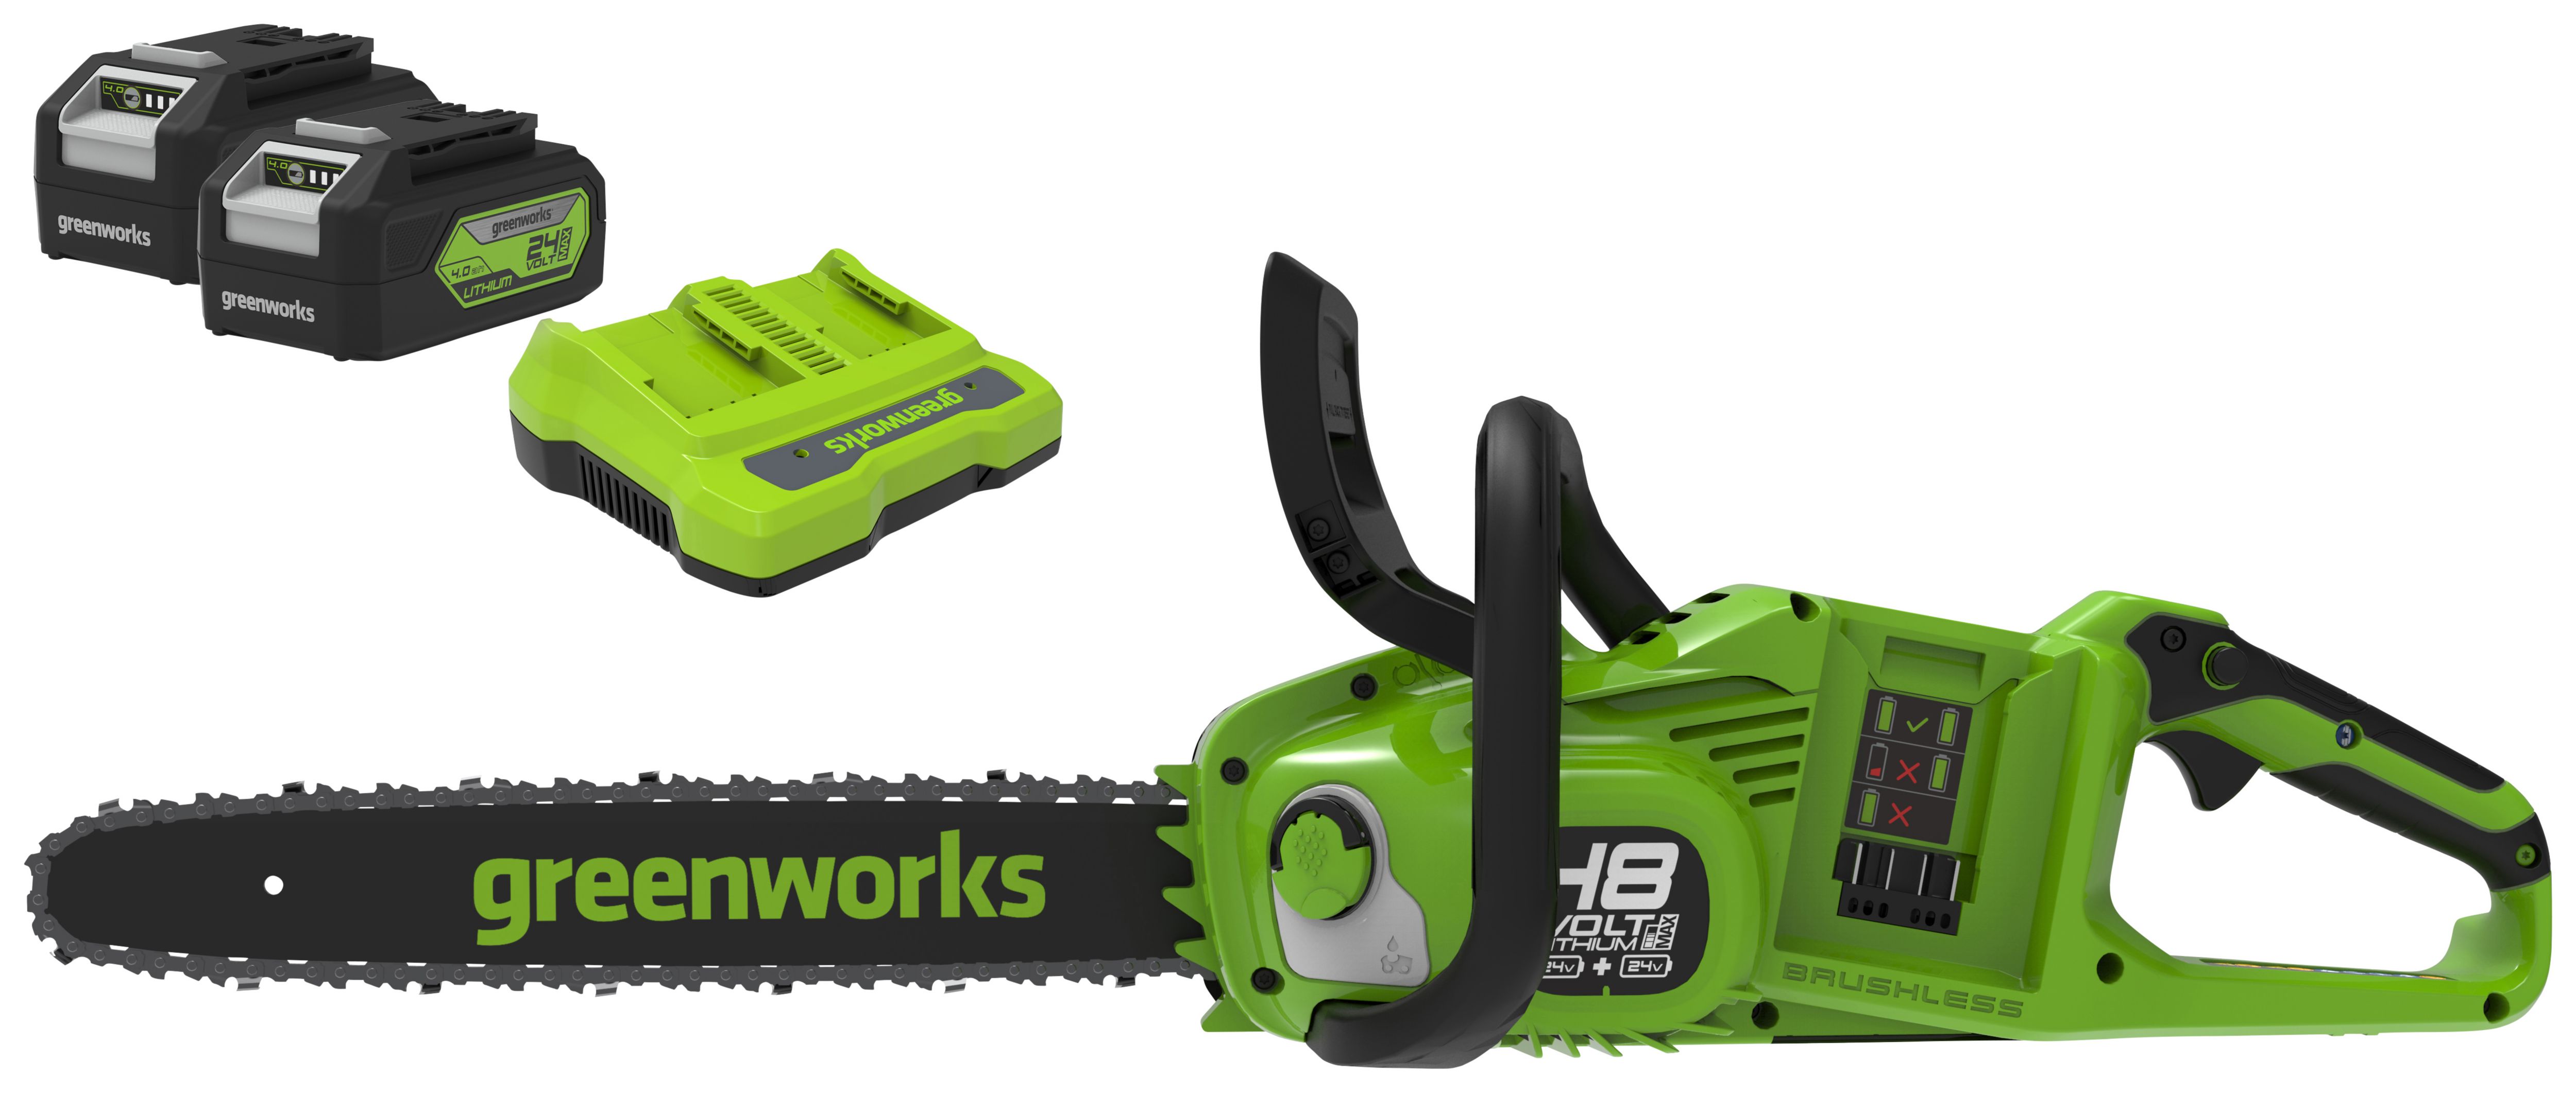 Greenworks Cordless Chainsaw 48V with 2 x 24V 4Ah Batteries & Charger